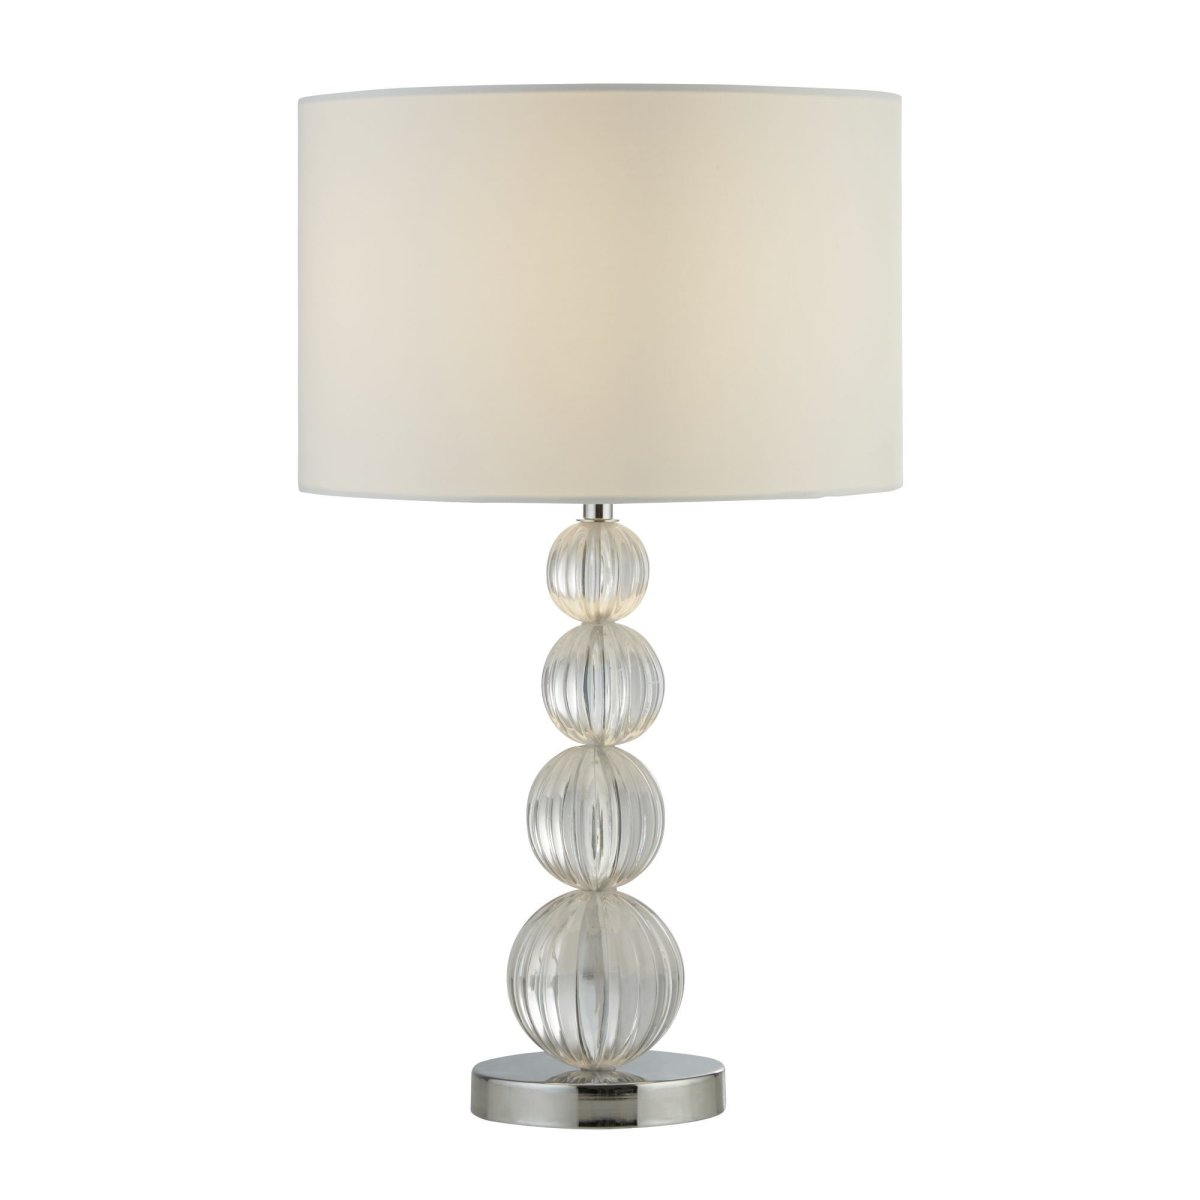 Louis 1 Light Table Lamp Chrome And Acrylic With White Shade - Bonnypack